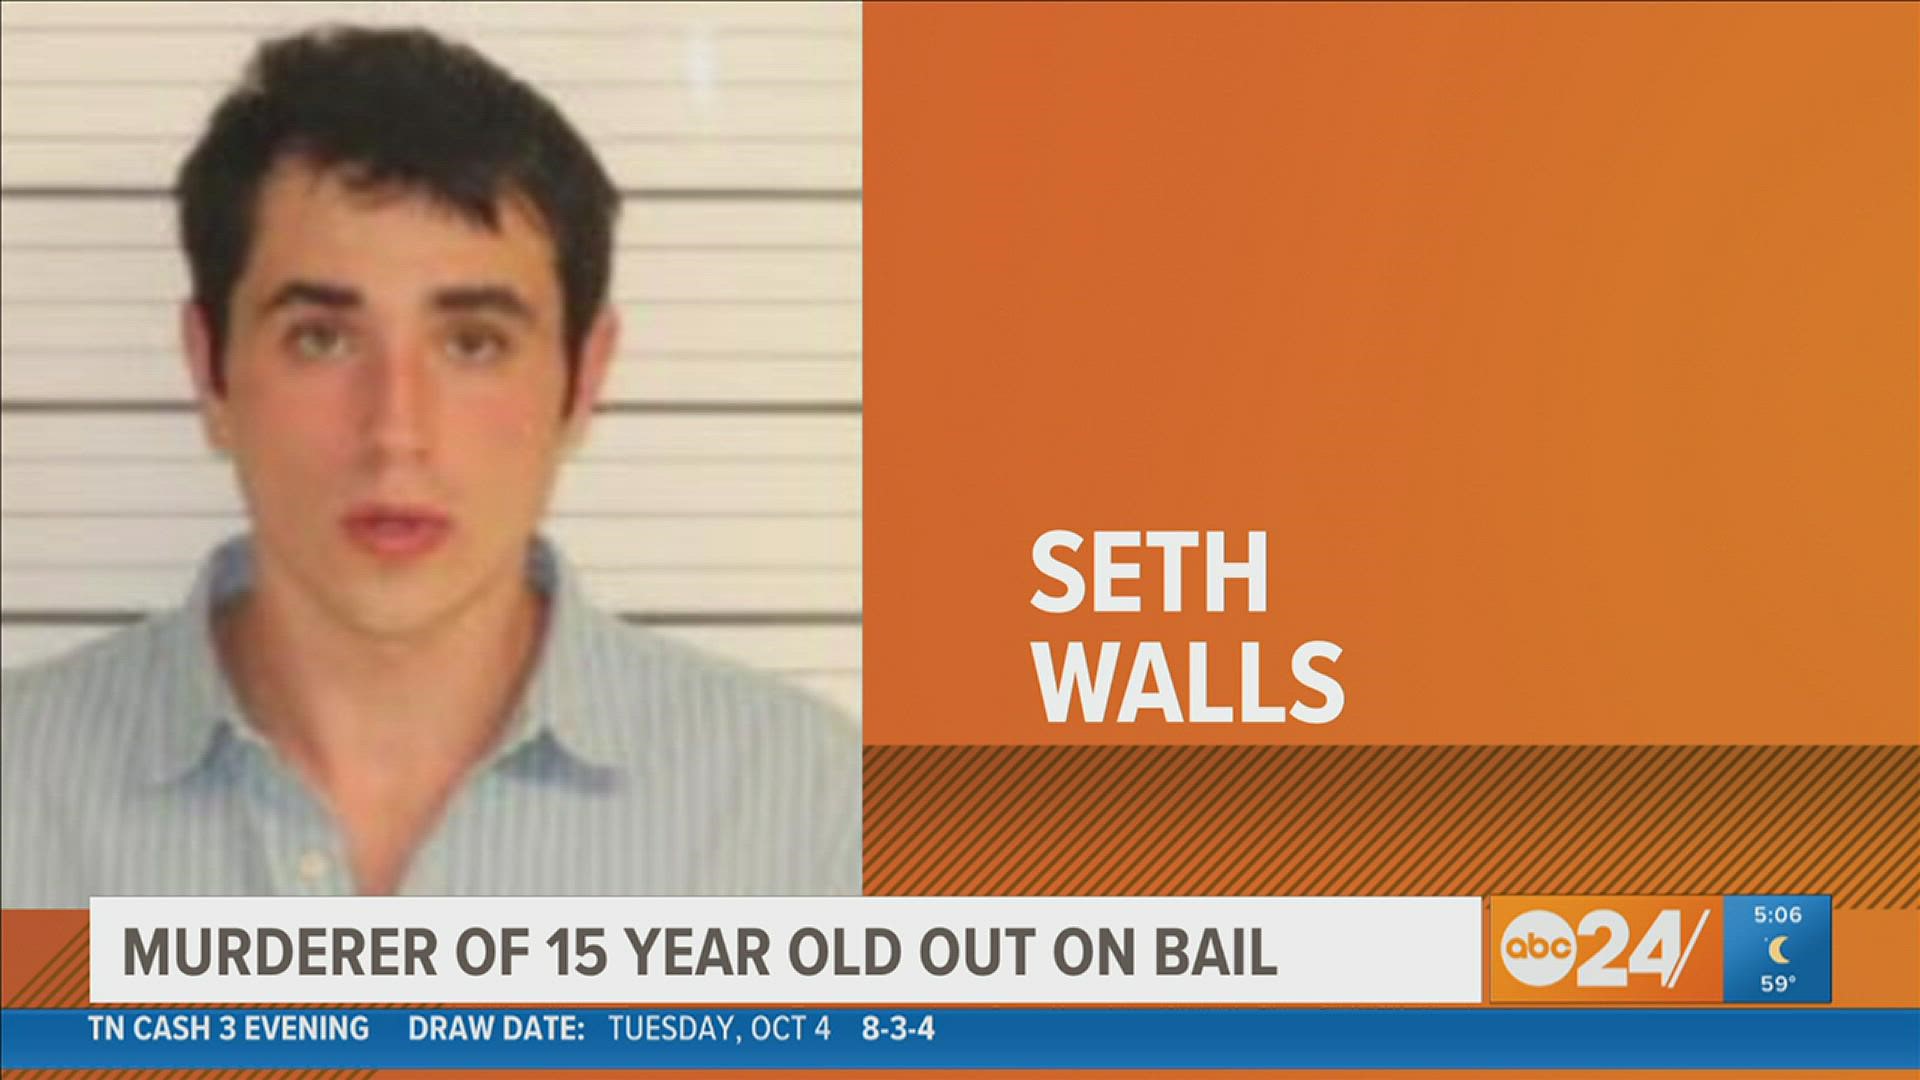 Seth Walls was charged with reckless homicide and reckless endangerment.